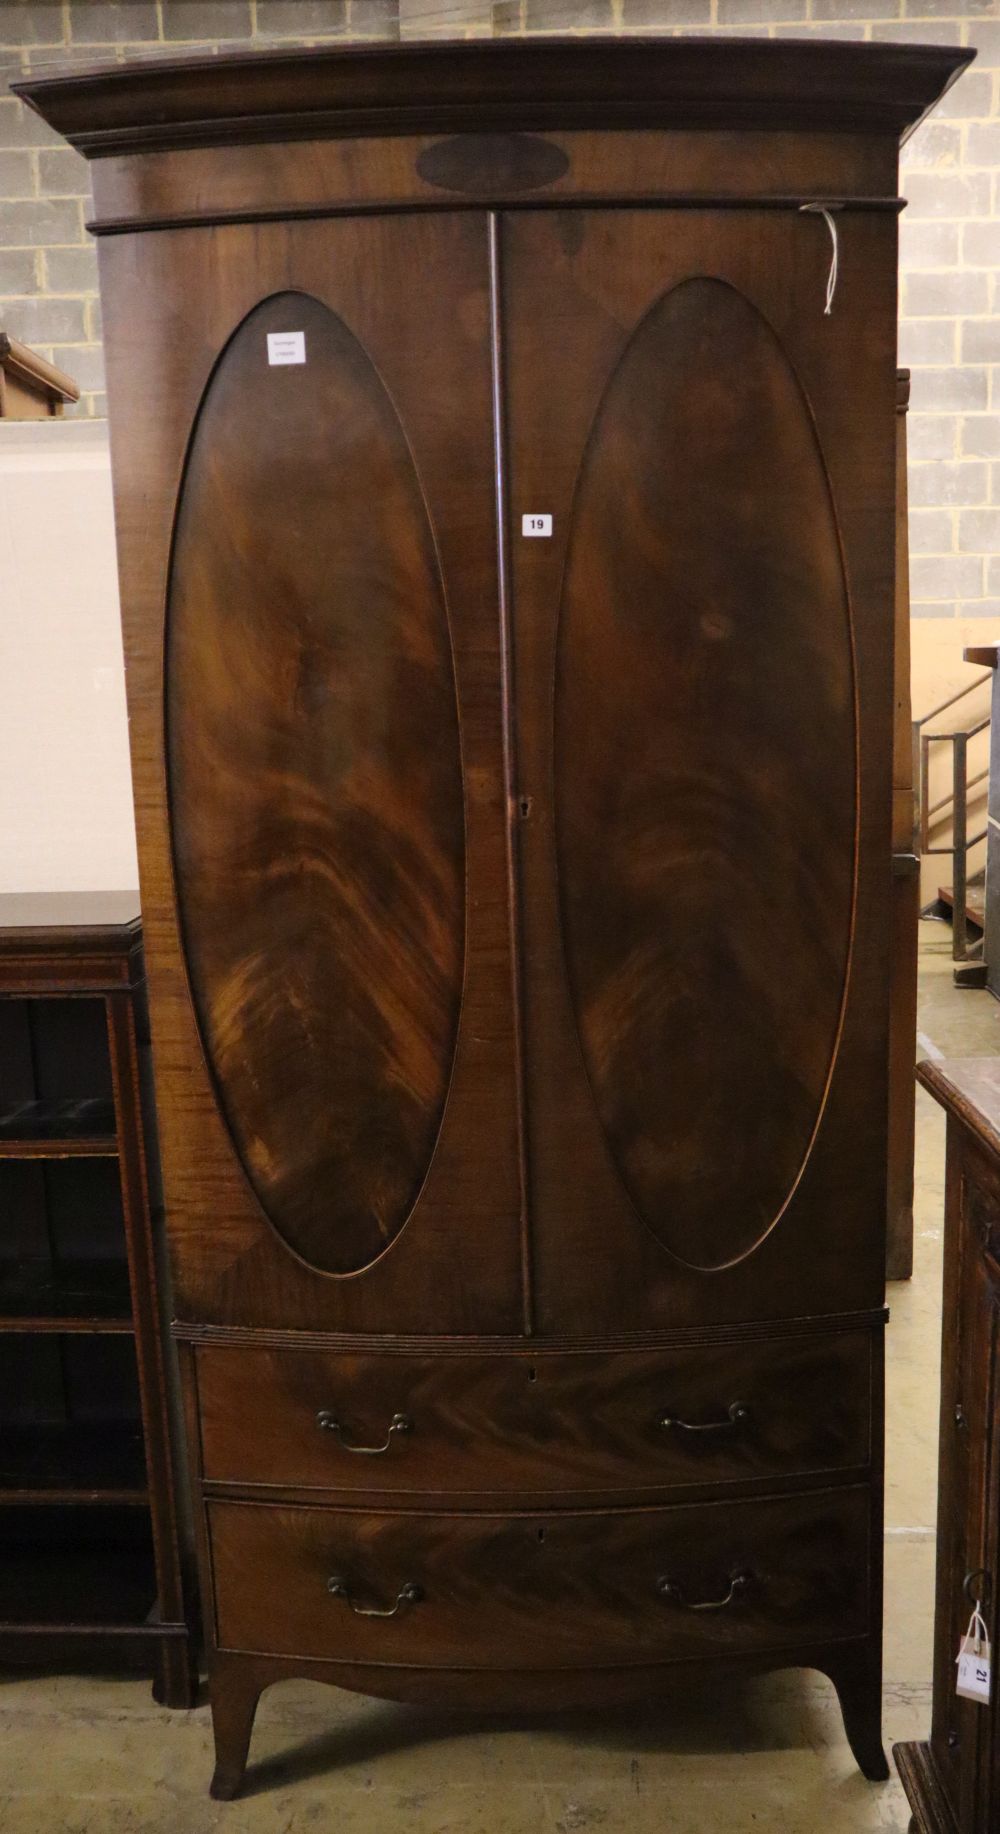 A 1920s George III style mahogany bow front wardrobe with two drawers, with key, width 102cm depth 54cm height 208cm